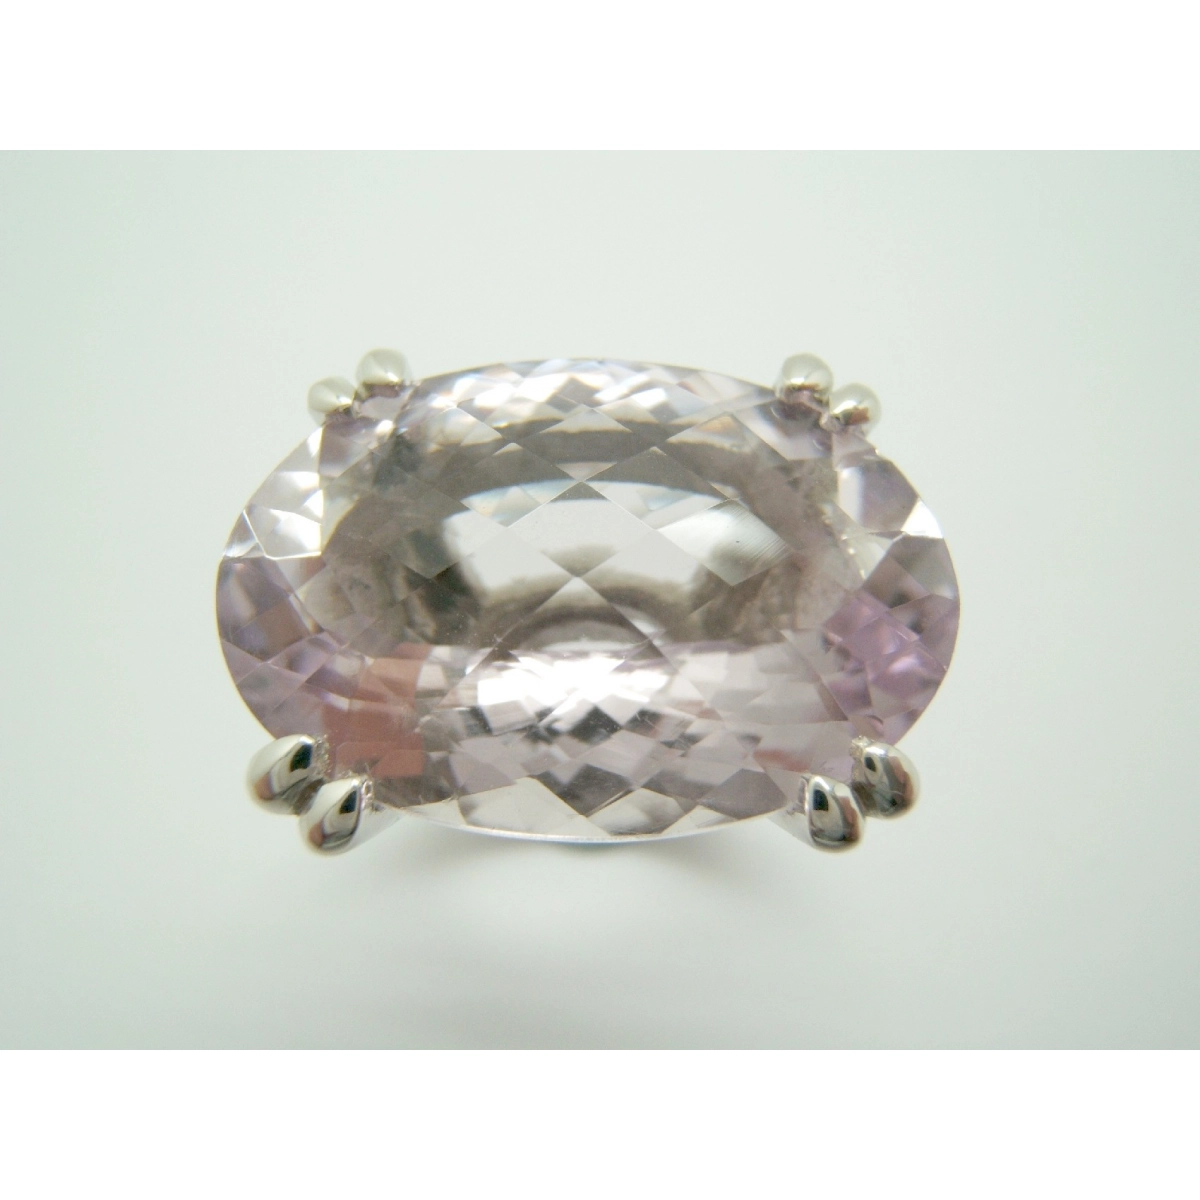 RING-SILVER AND AMETHYST-88/96-20 B-79 A-88/96-20